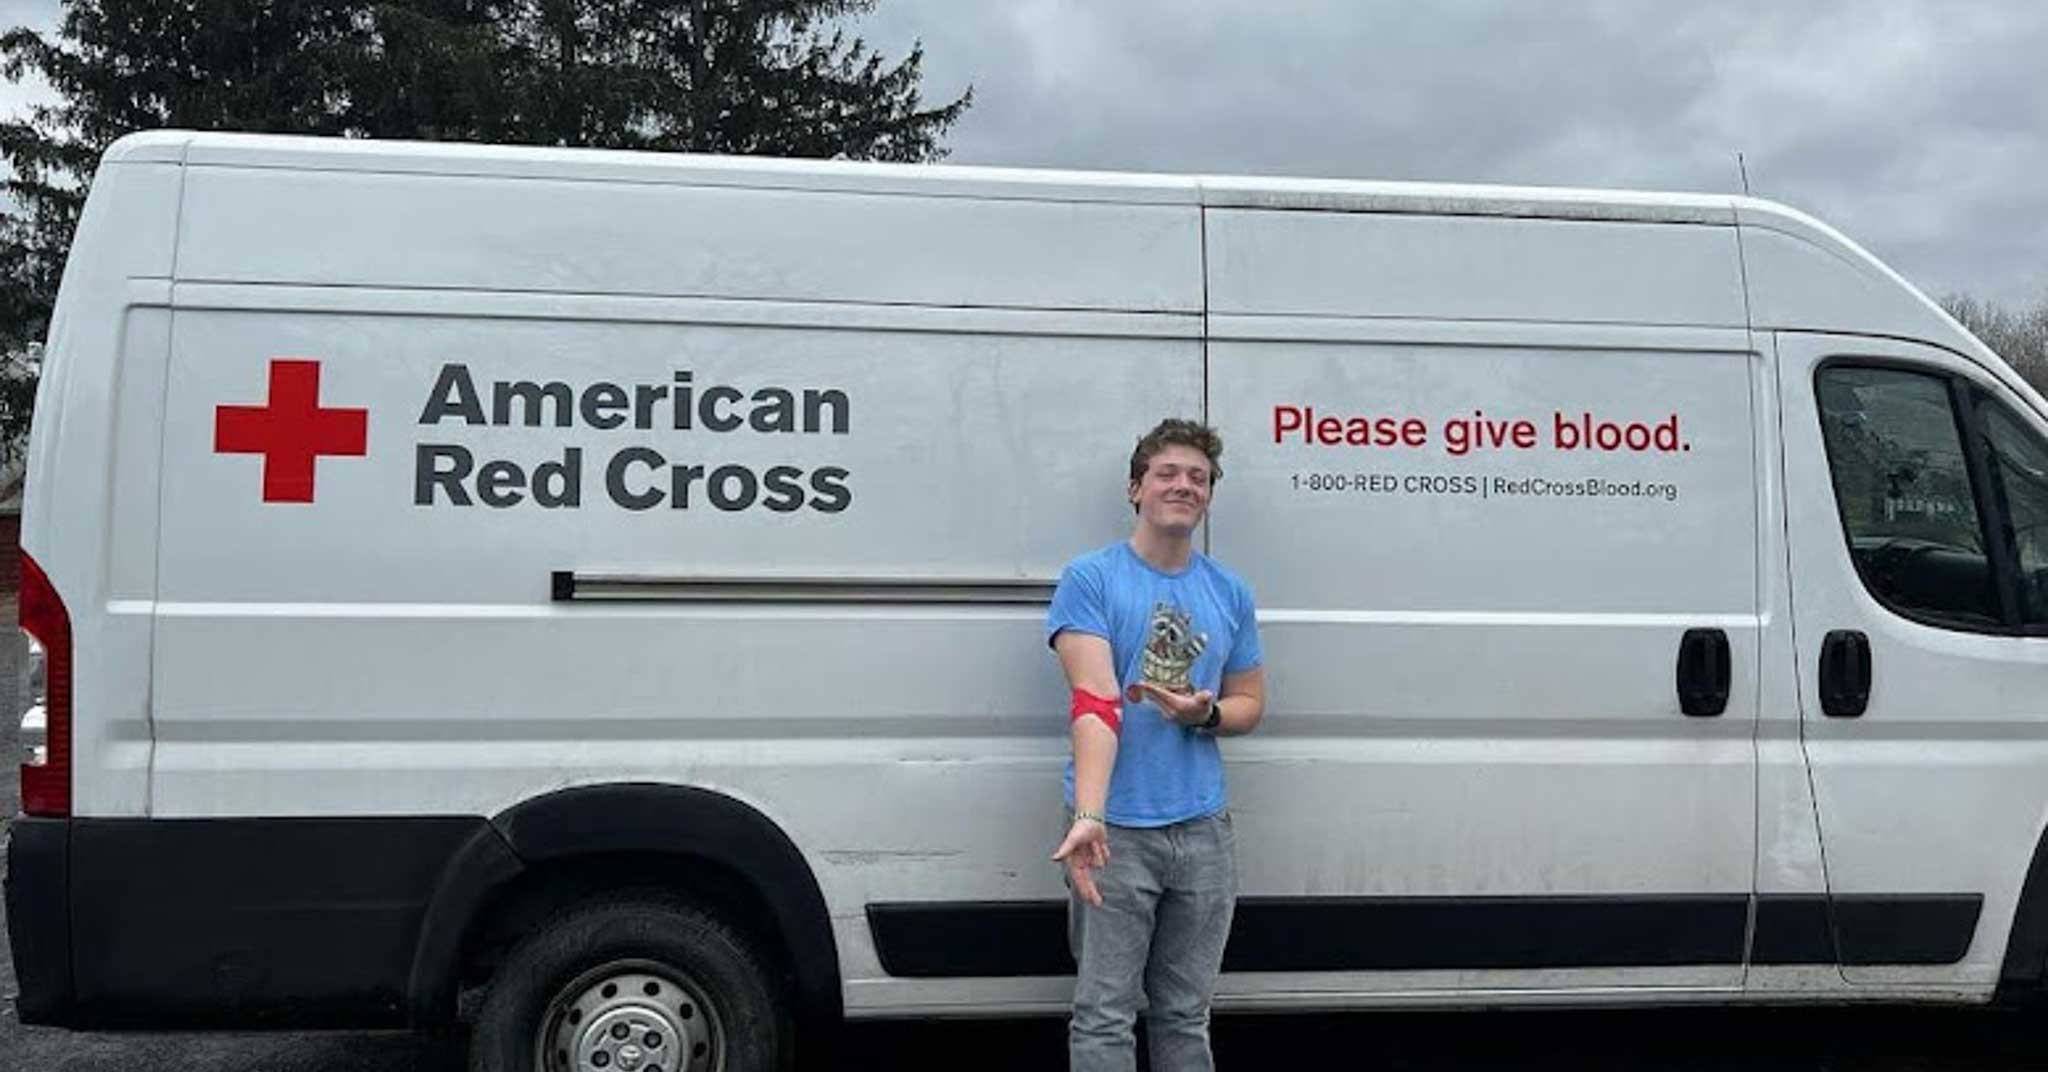 Teen holds out arm in front of American Red Cross ban